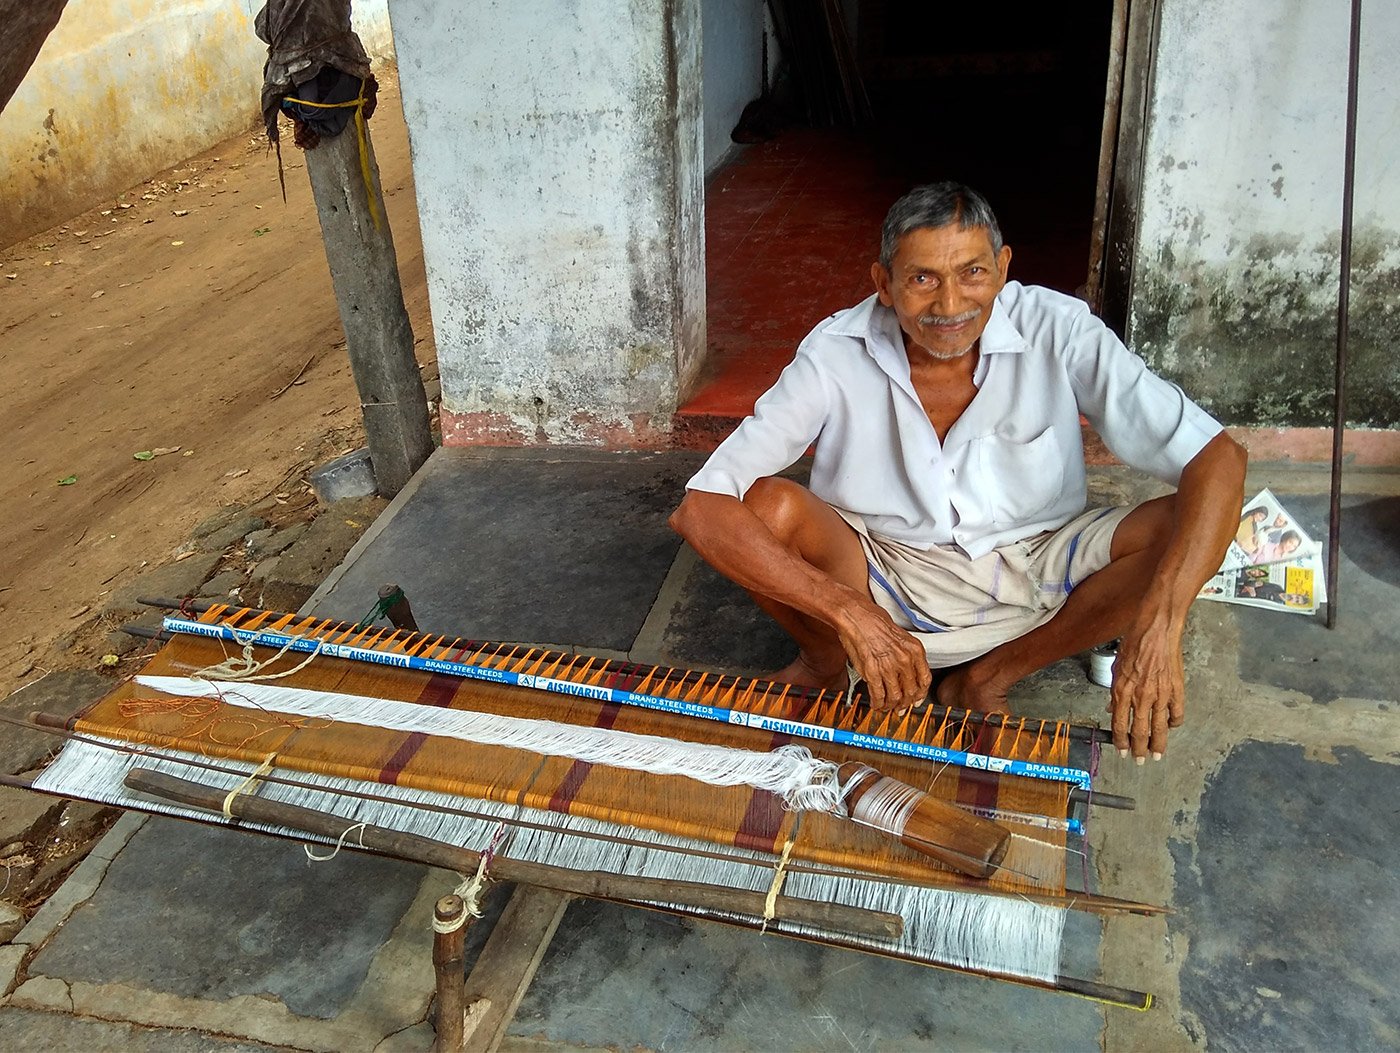 Most of the handloom weavers in Pedana in Andhra Pradesh are elderly, as are many of the town’s Kalamkari printers – a lack of state support and poor incomes have impacted both industries and forced the younger generation to migrate for work